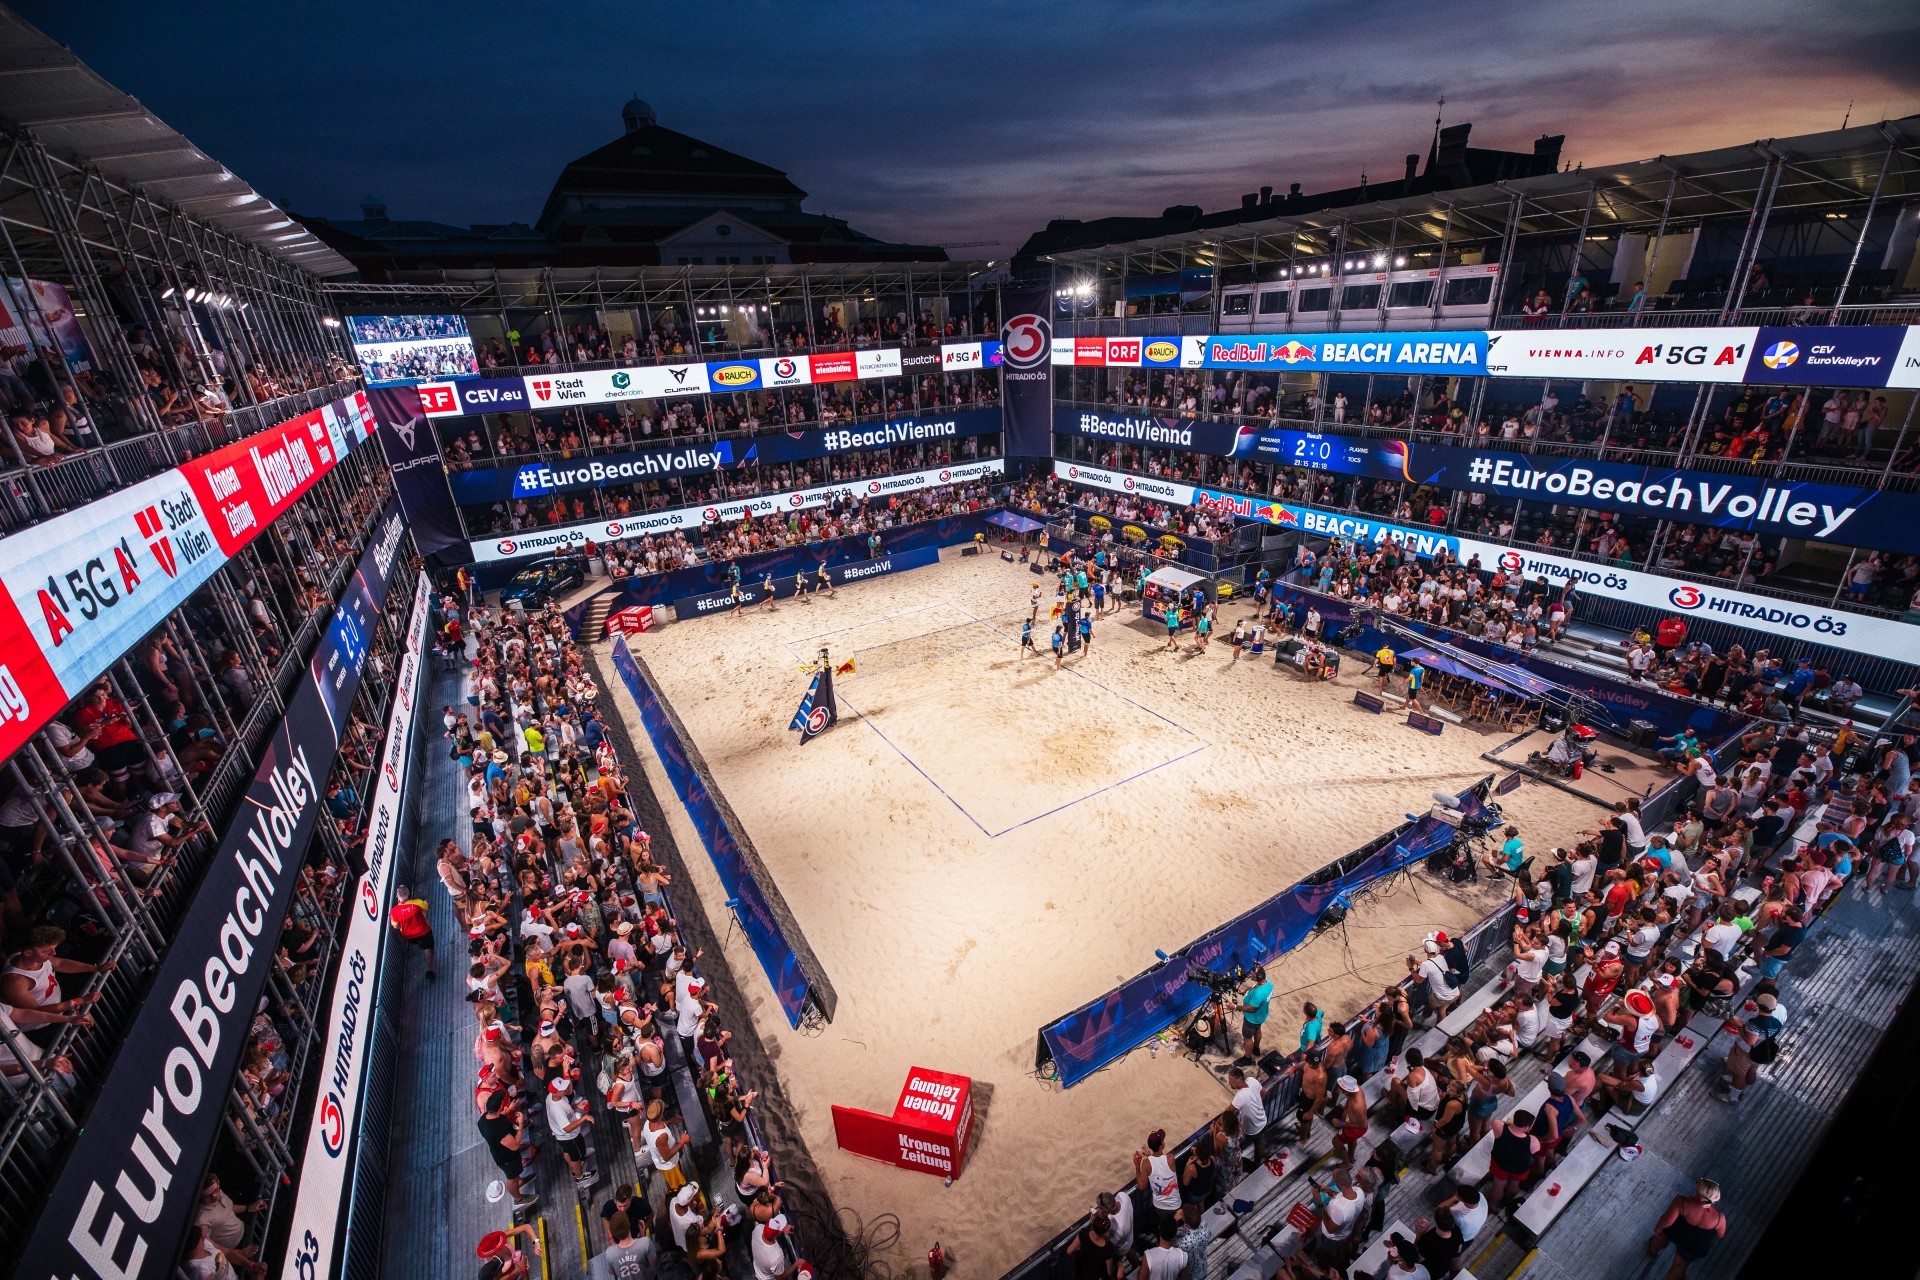 The remodeled Red Bull Beach Arena was electric in each of the five days of the event